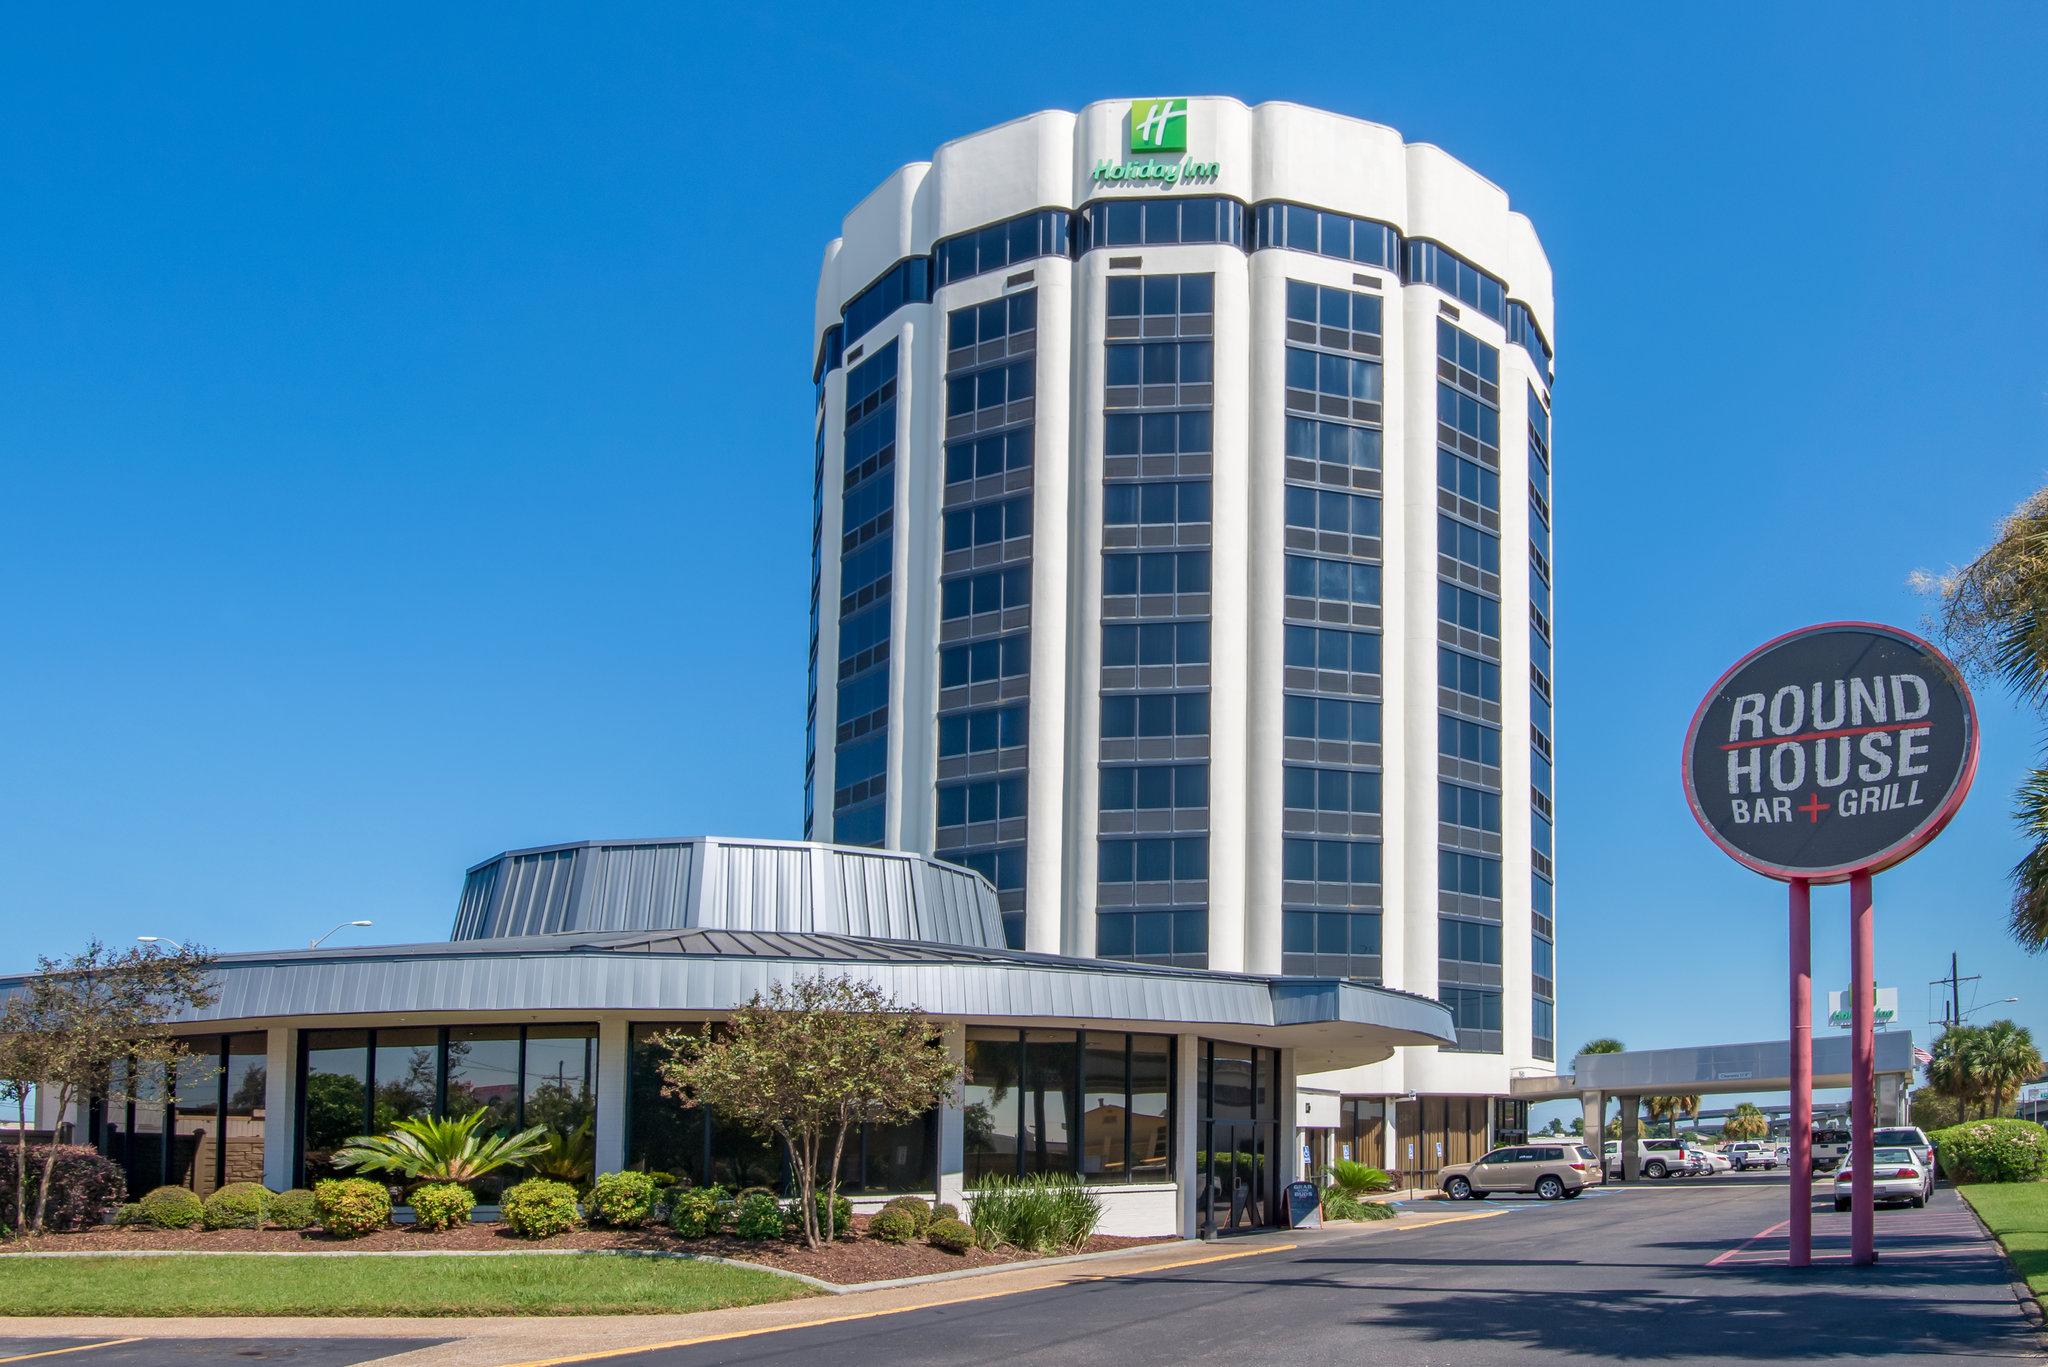 Holiday Inn New Orleans West Bank Tower in Gretna, LA